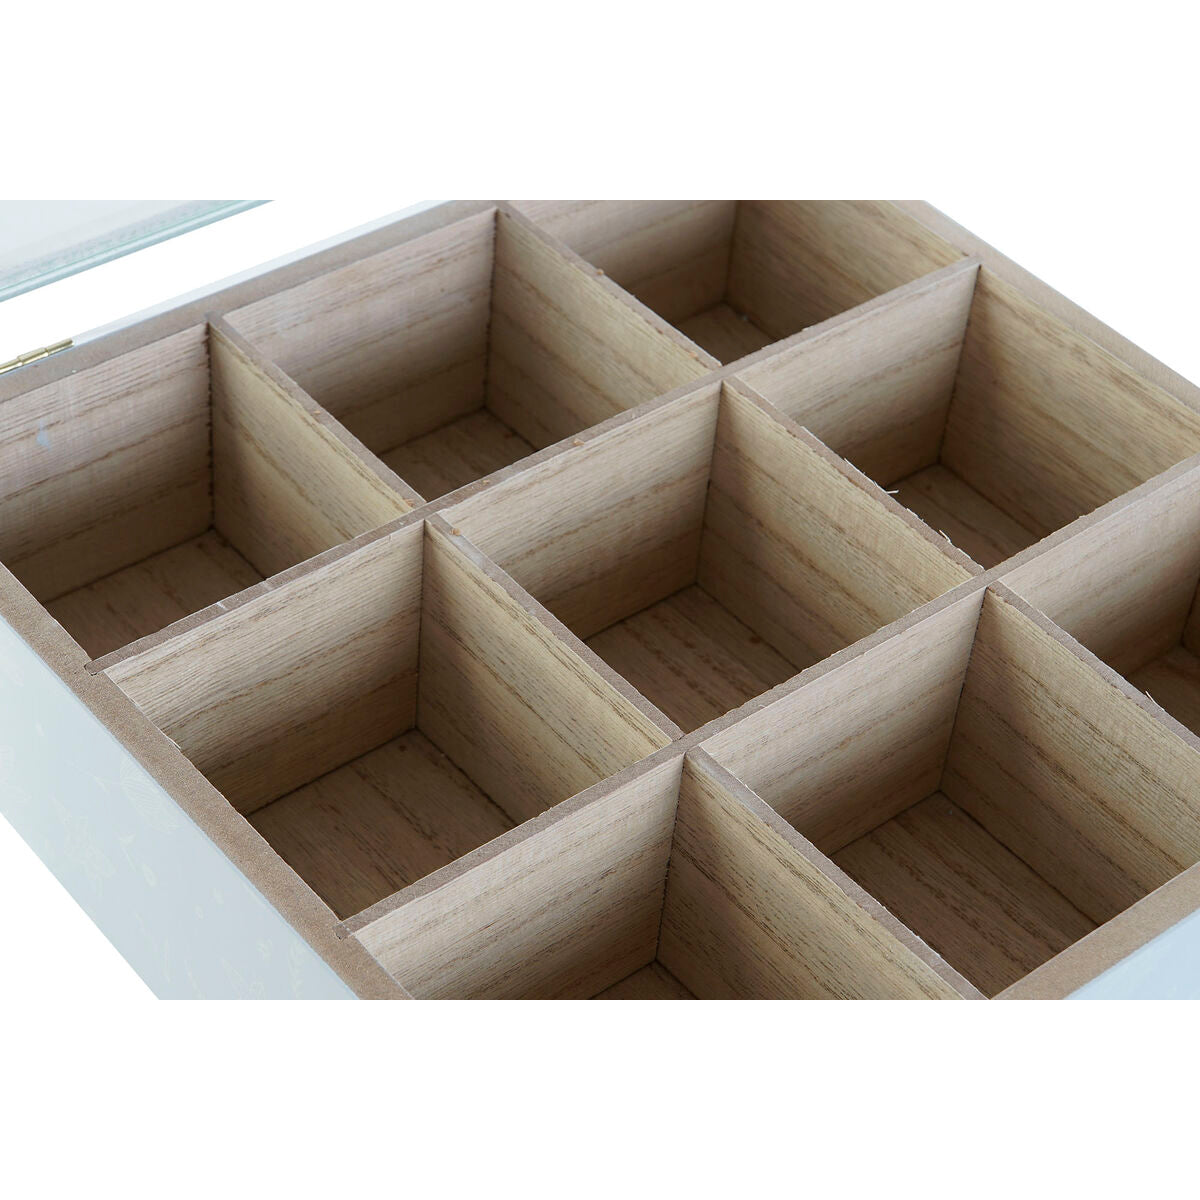 Box for Infusions DKD Home Decor Blauw Wit Groen Lila Metaal Kristal Hout MDF (3 Stuks)